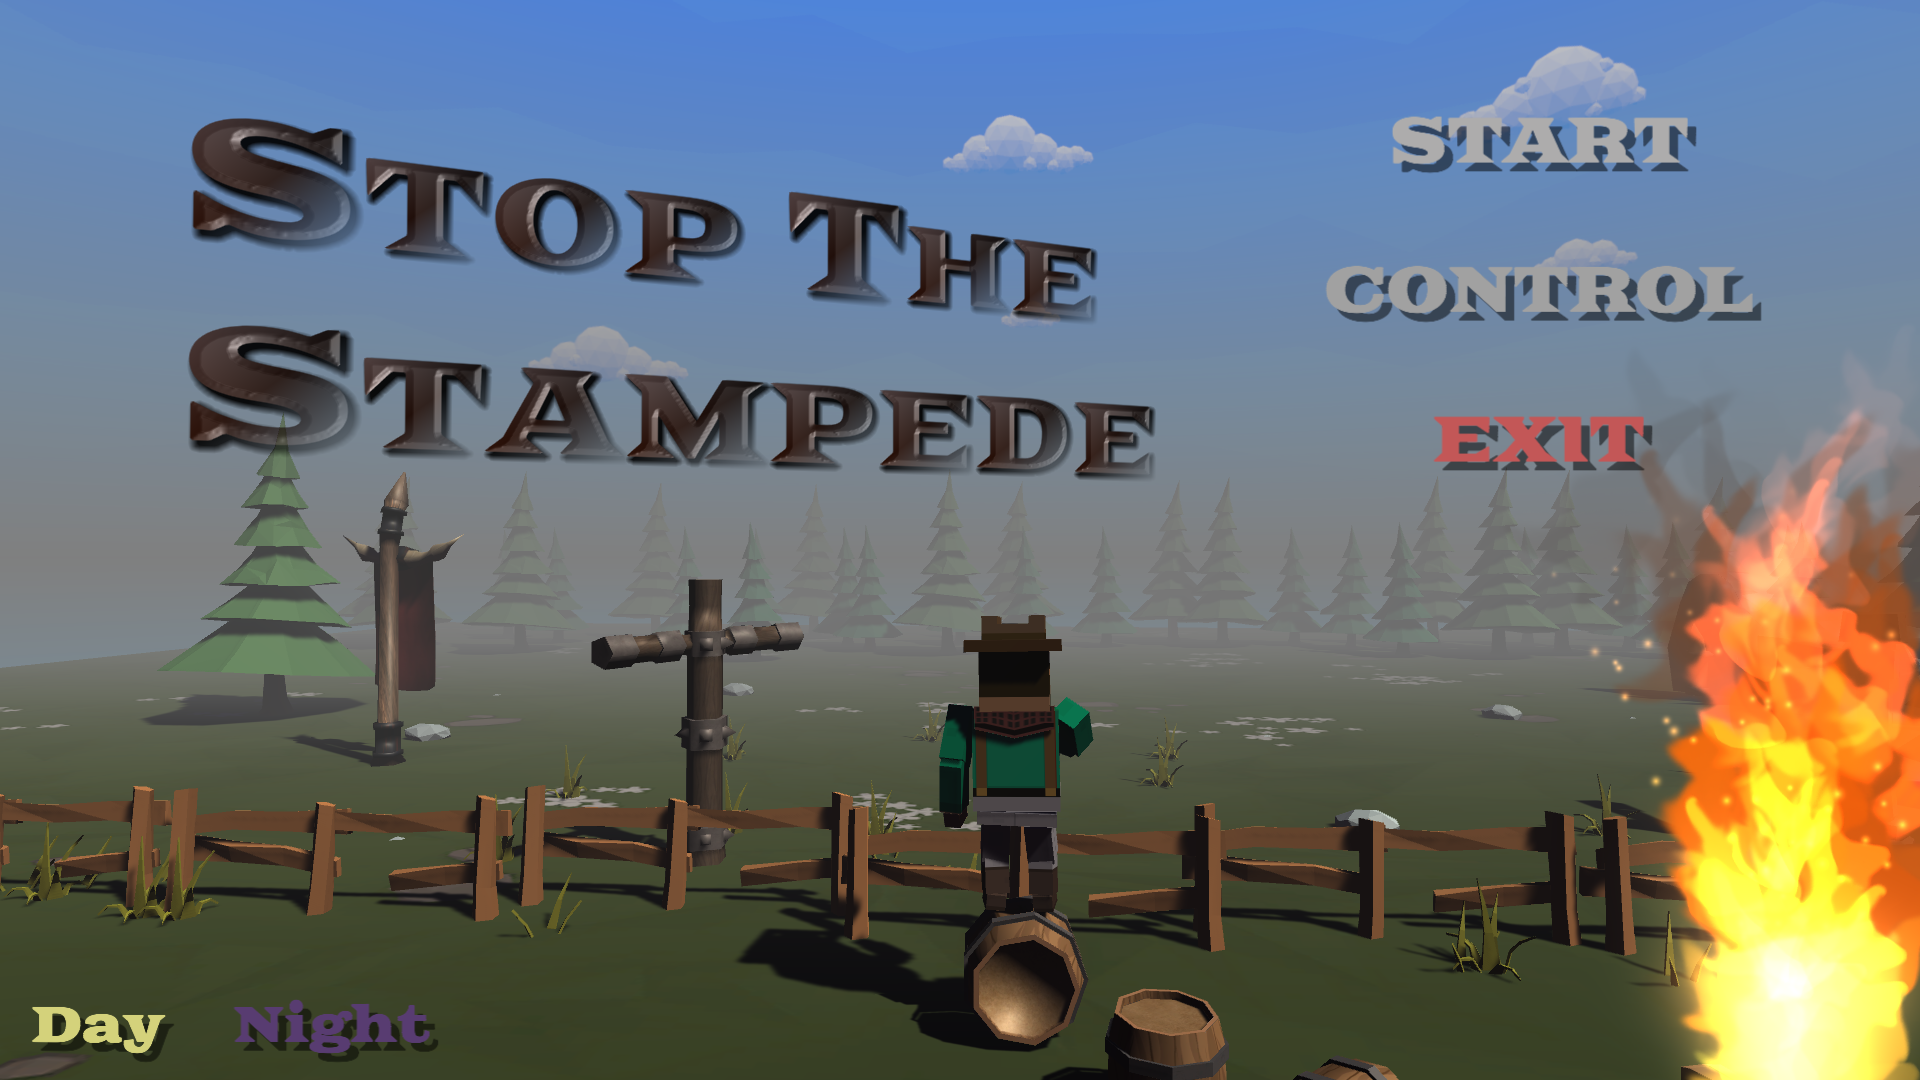 Stop The Stampede